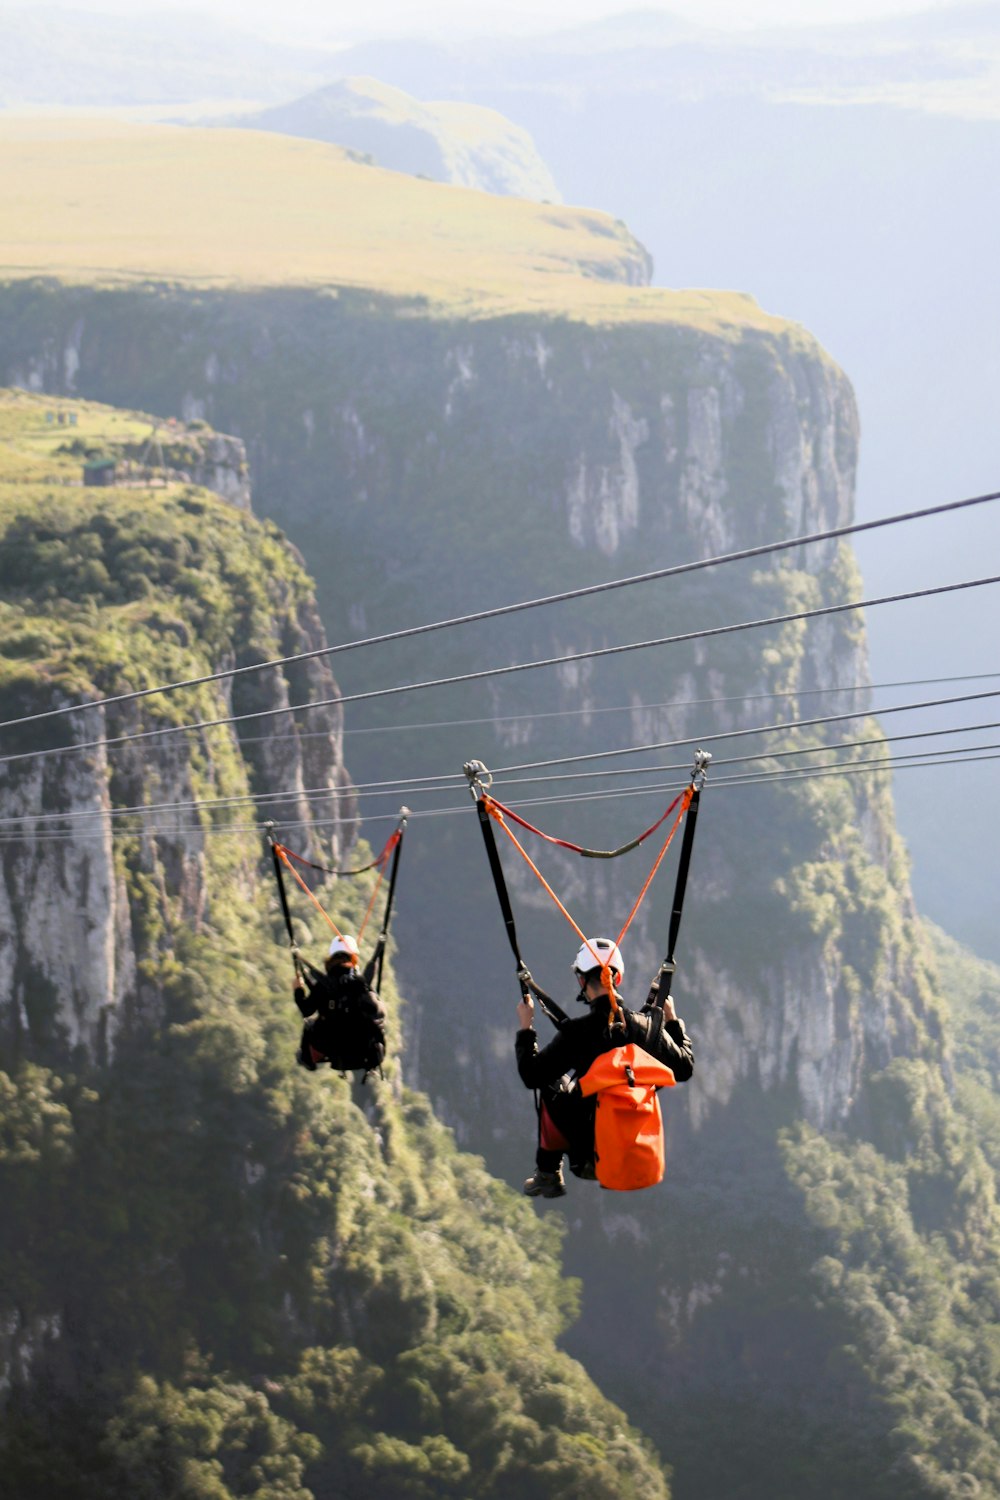 a couple of people riding on top of a zip line